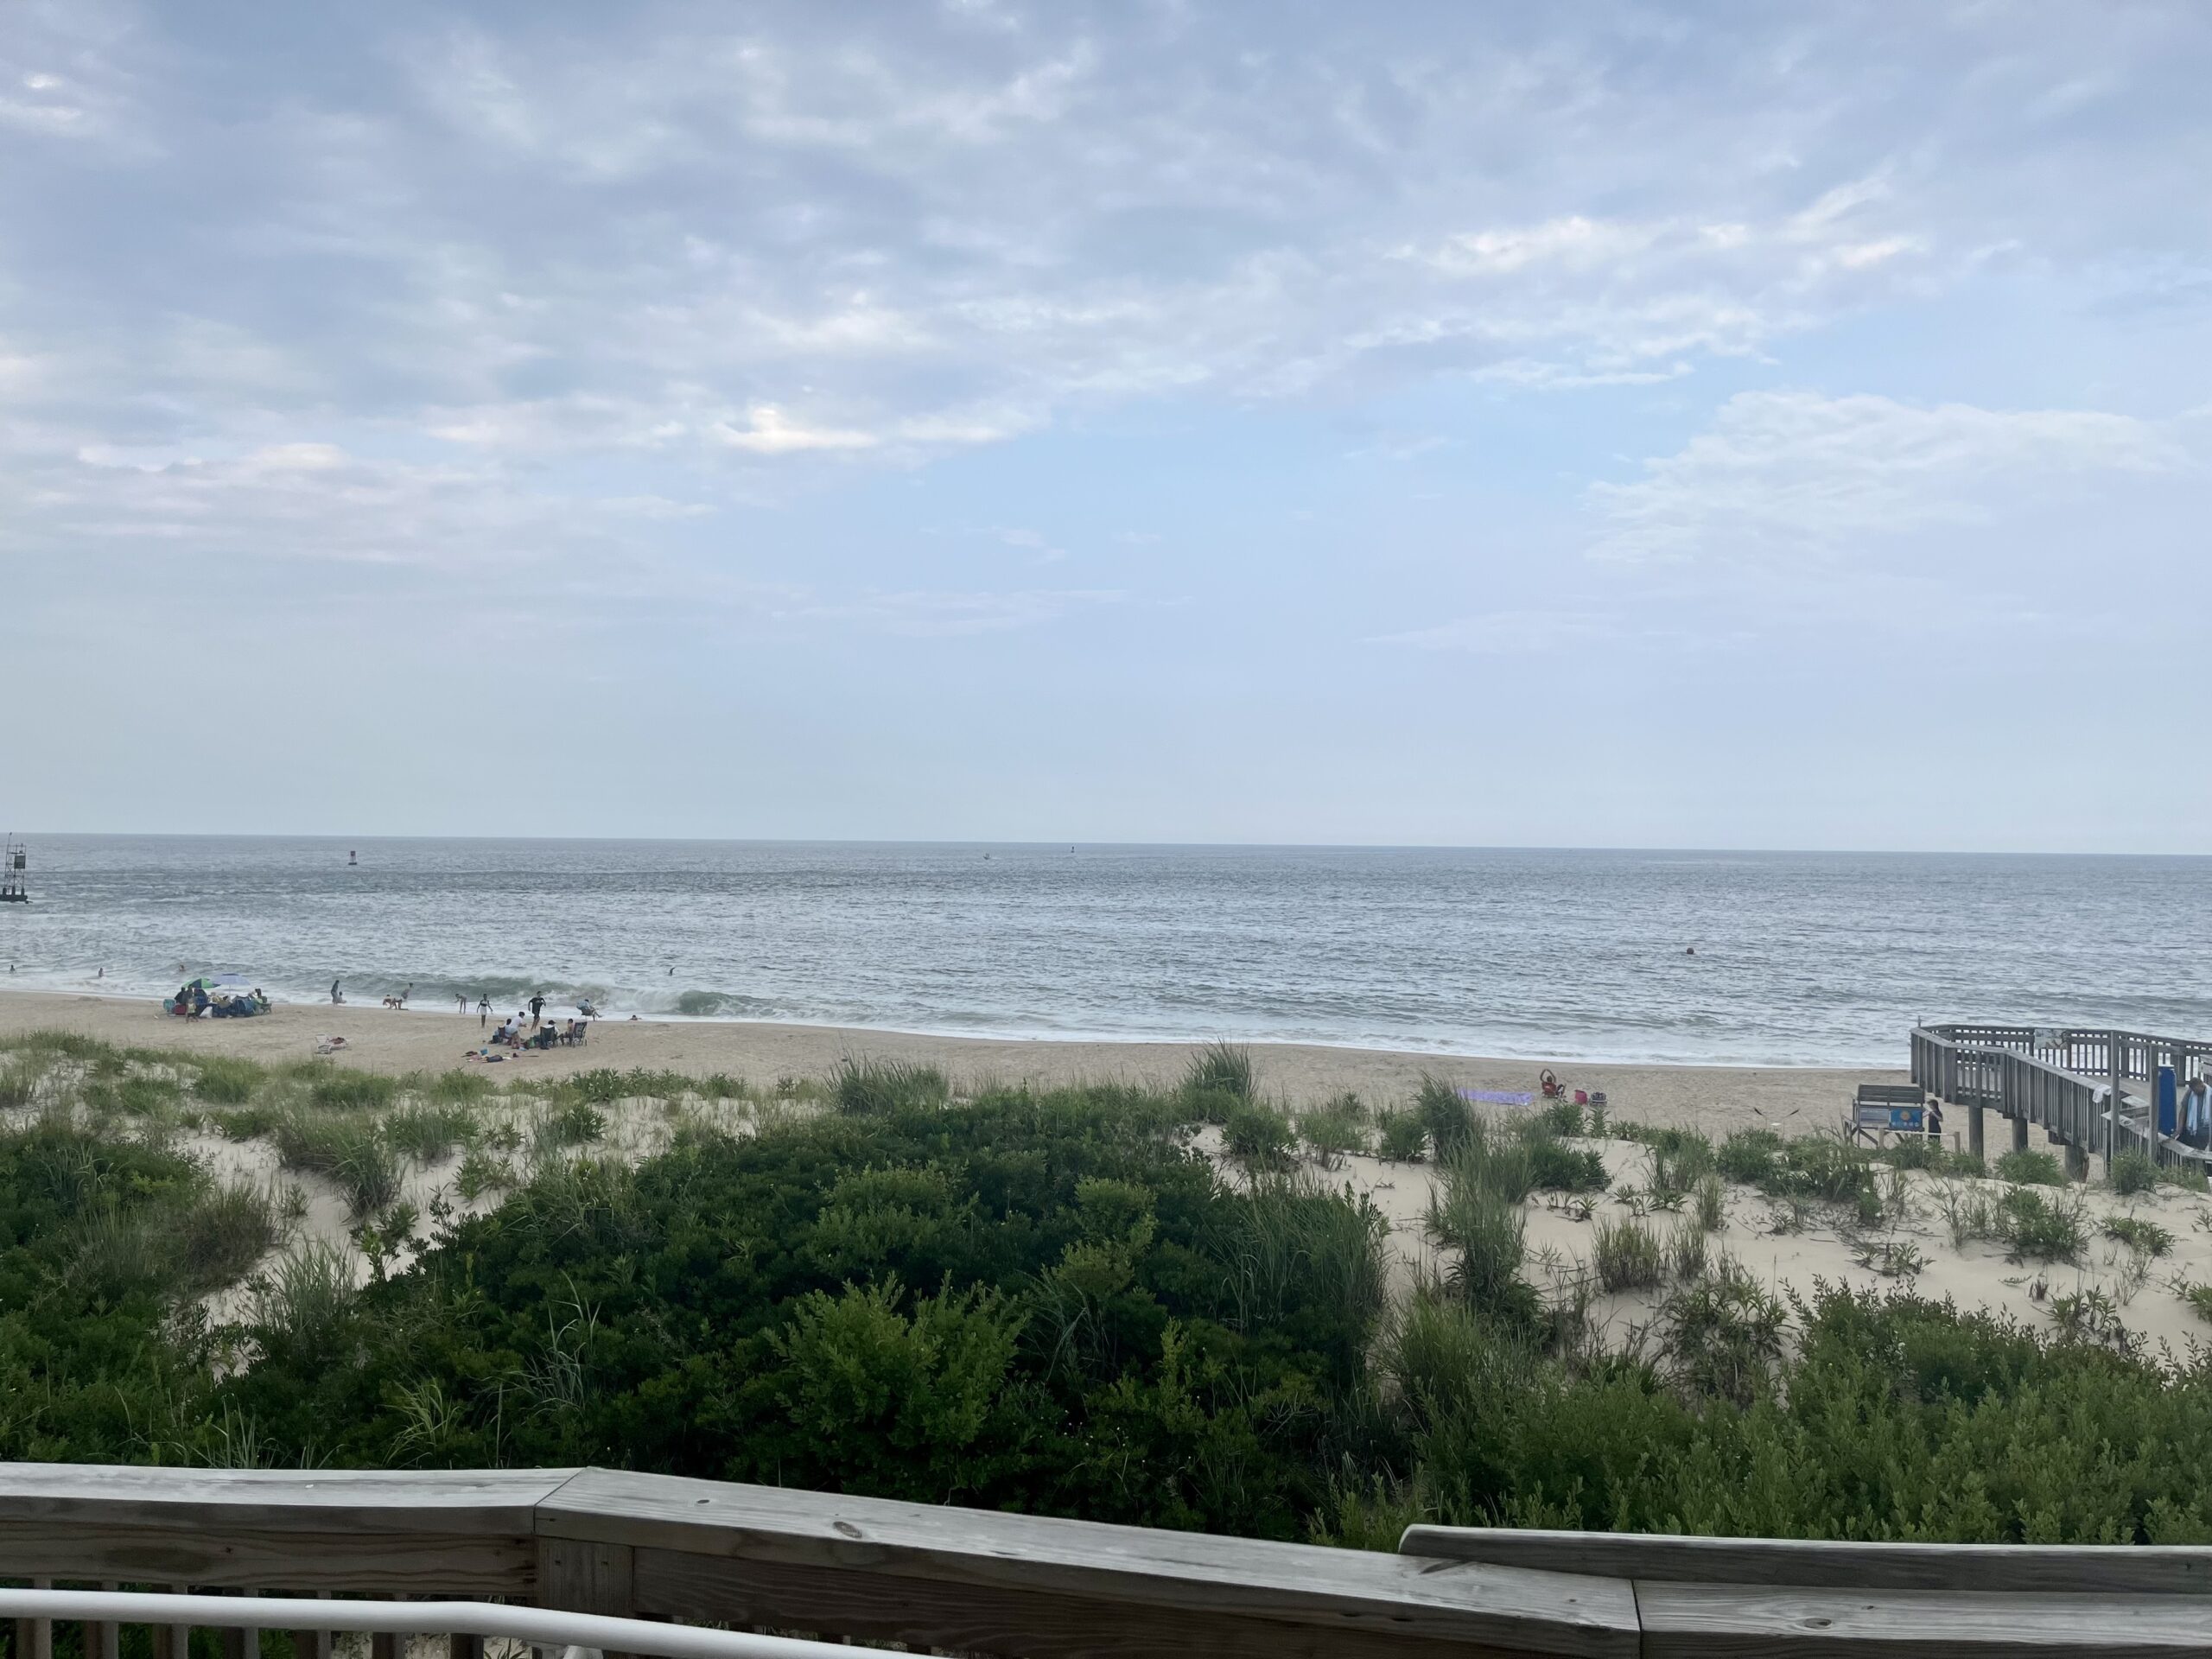 View from the deck of Big Chill at the Delaware Seashore State Park - Oceanfront Restaurants in Bethany Beach